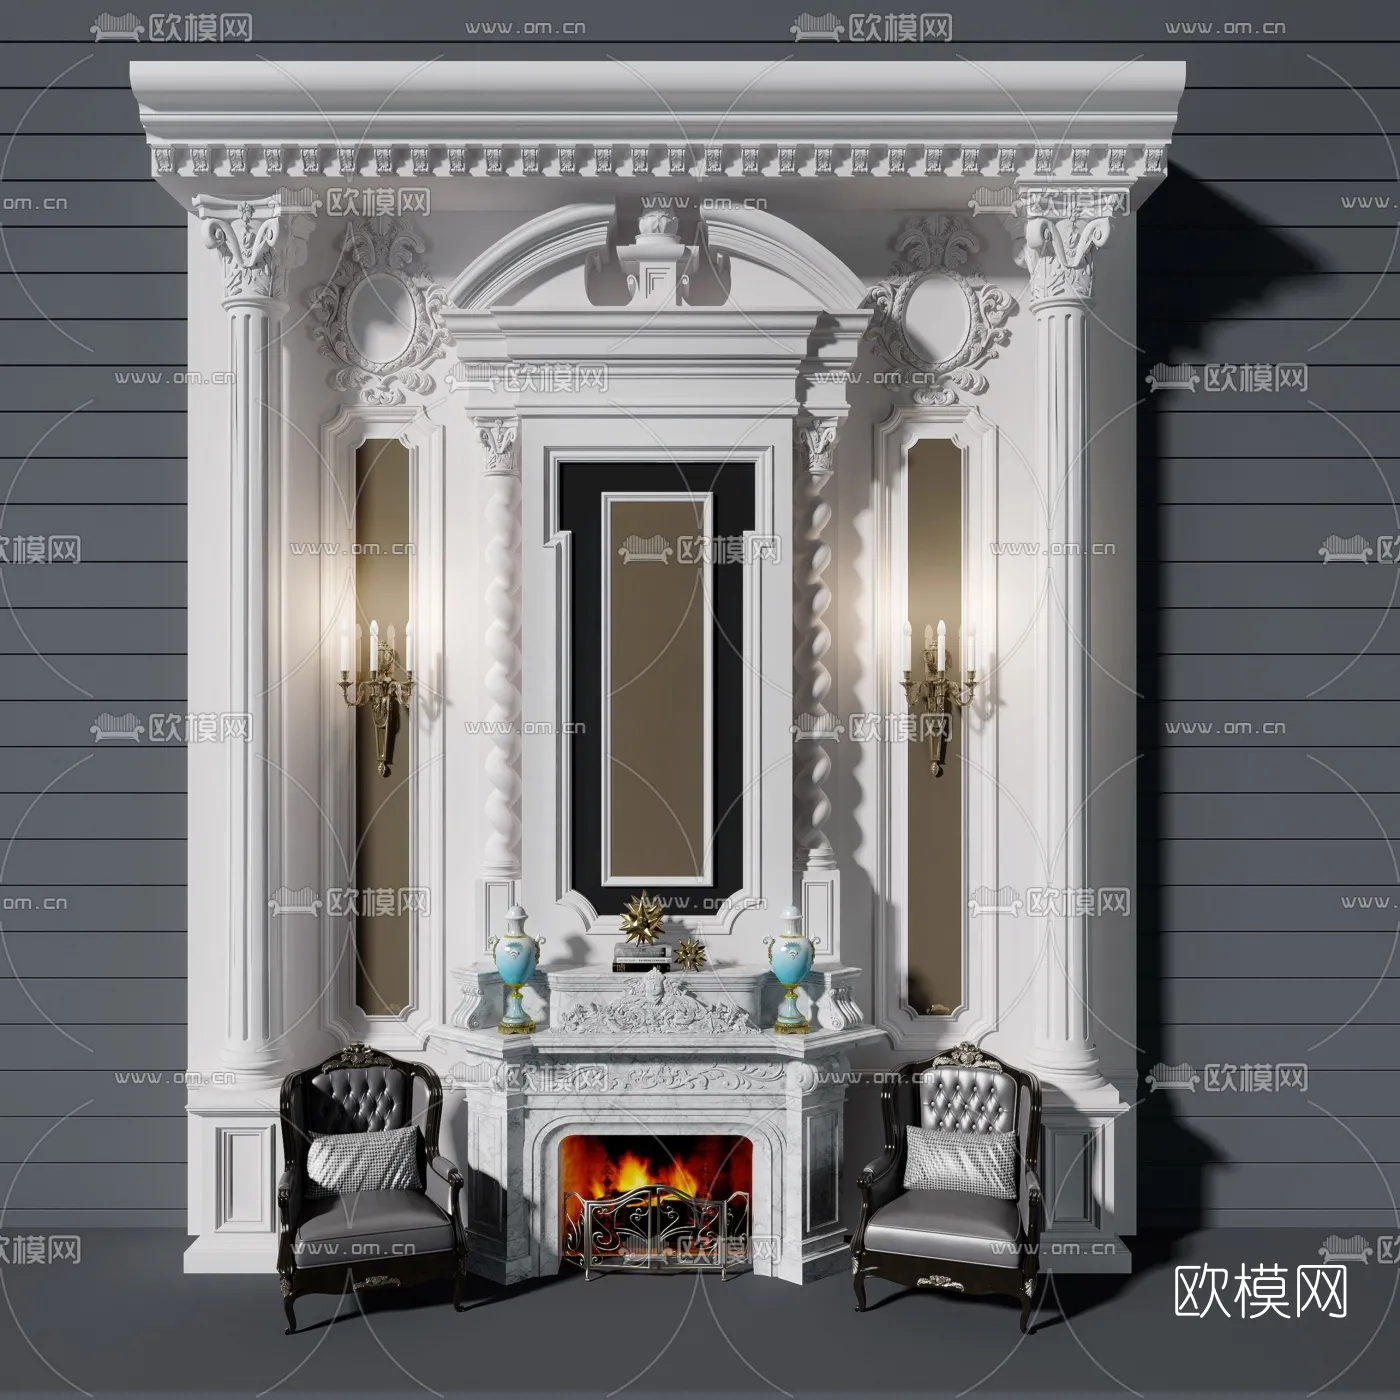 CLASSIC – FIREPLACE 3DMODELS – 003